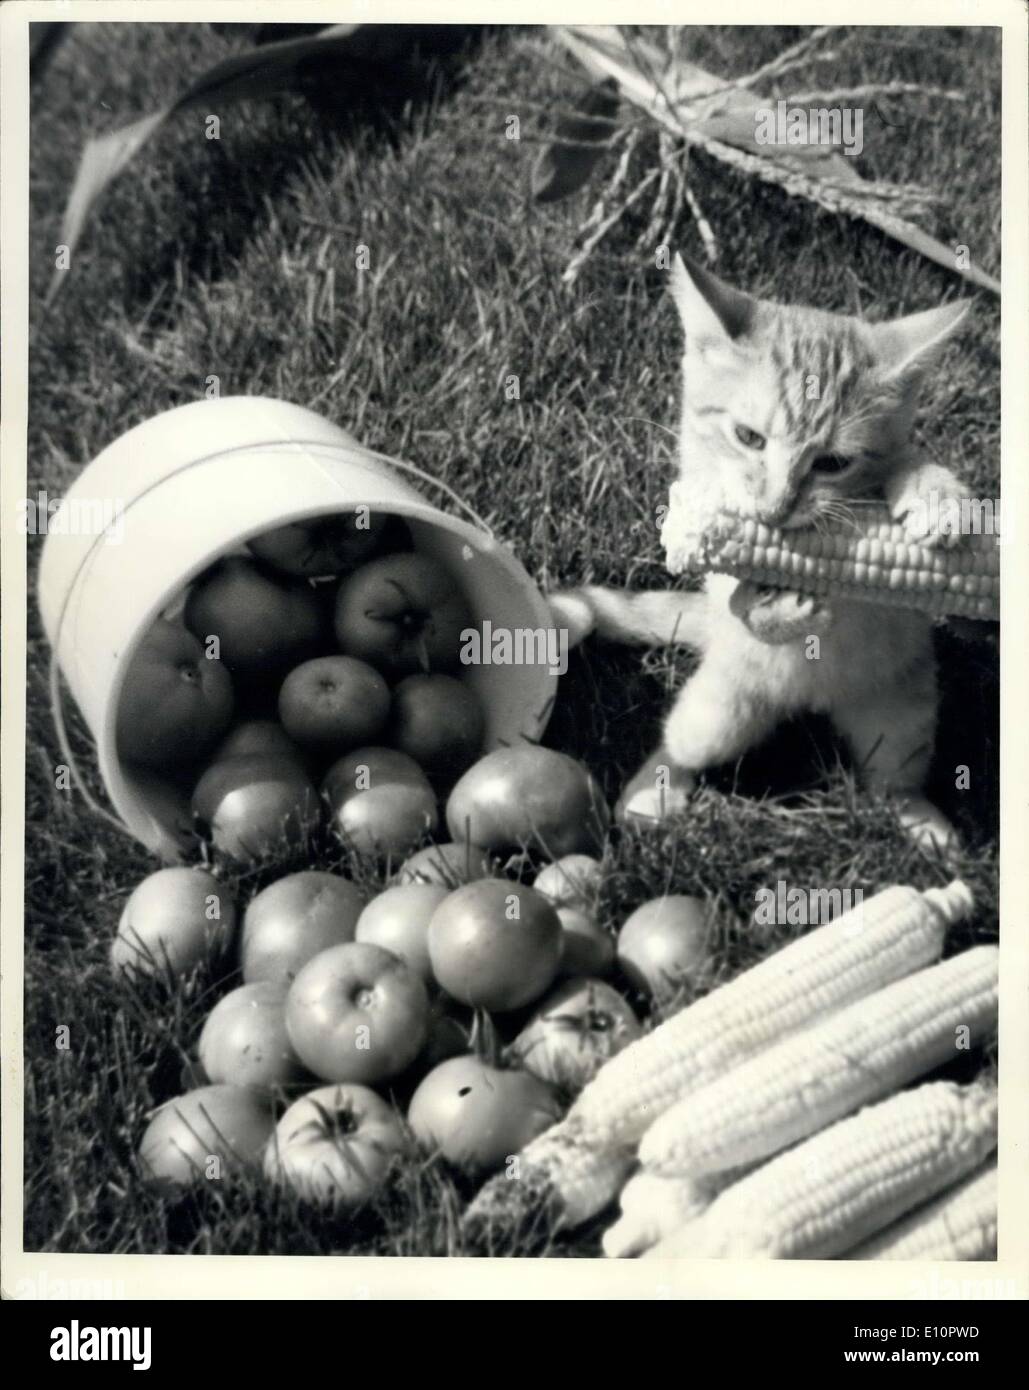 Sep. 23, 1973 - Dear Sir: Please I sincerely hope that my photo contribution can be of some use to your publication. The picture is from my little cat Mini in ''Who's being eating my Corn'' Again I hope you can use it. Sincerely, ''(Ilegible) Stock Photo